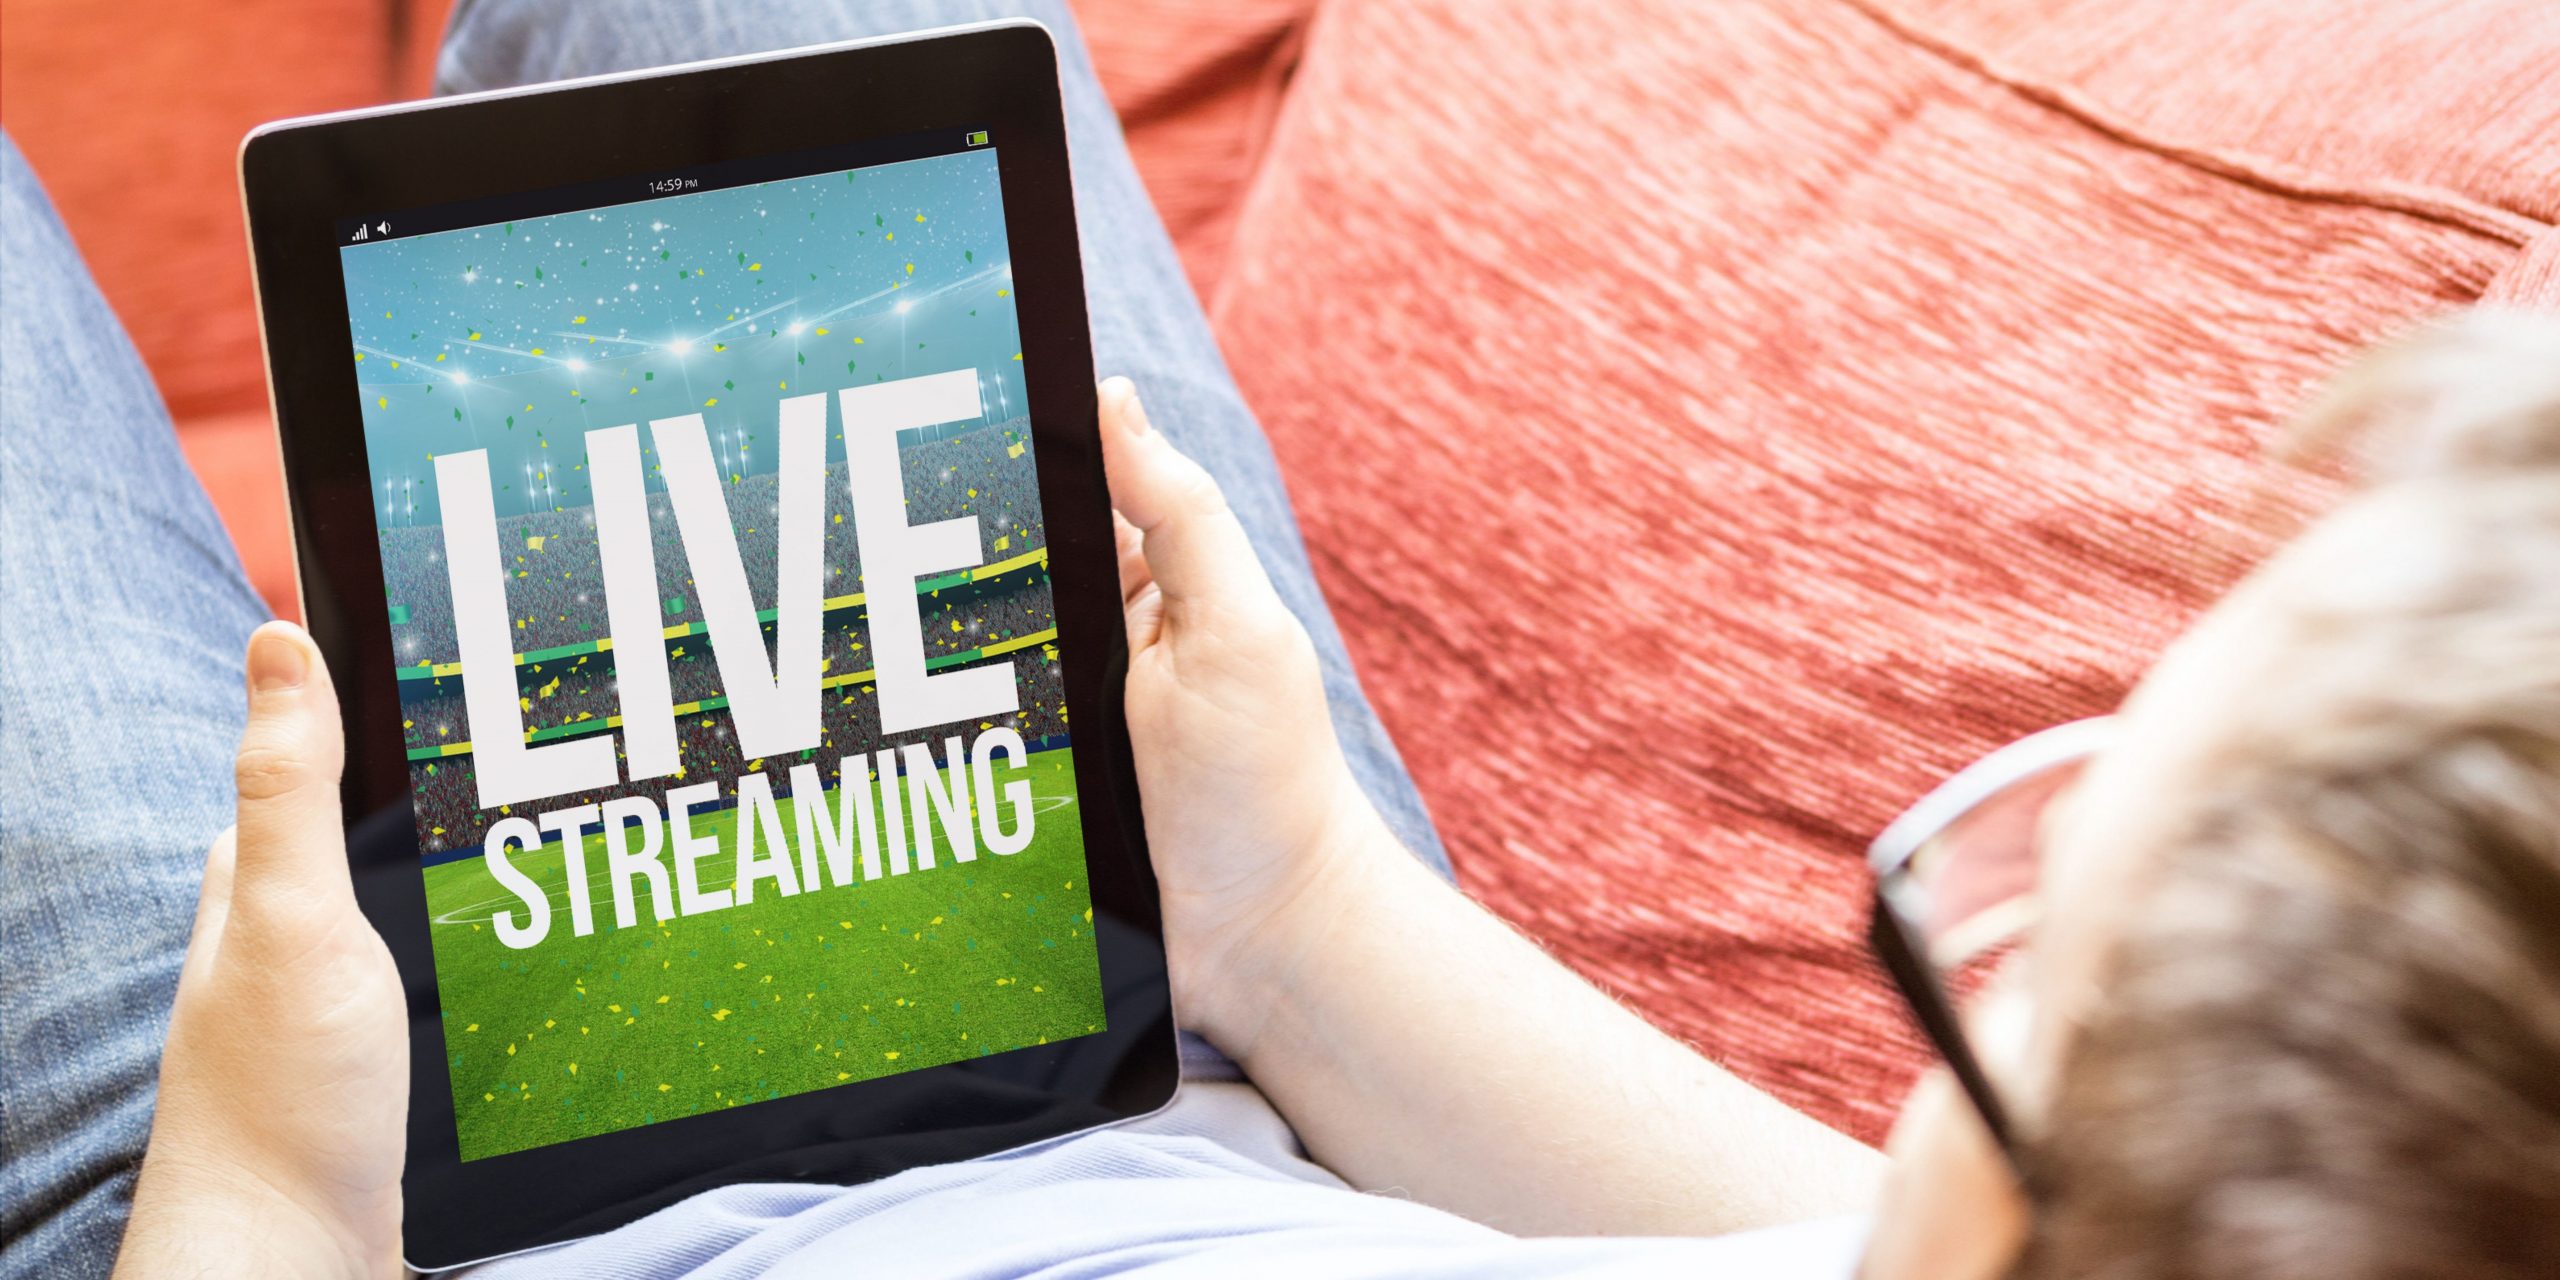 What are live streaming services and how do they work?